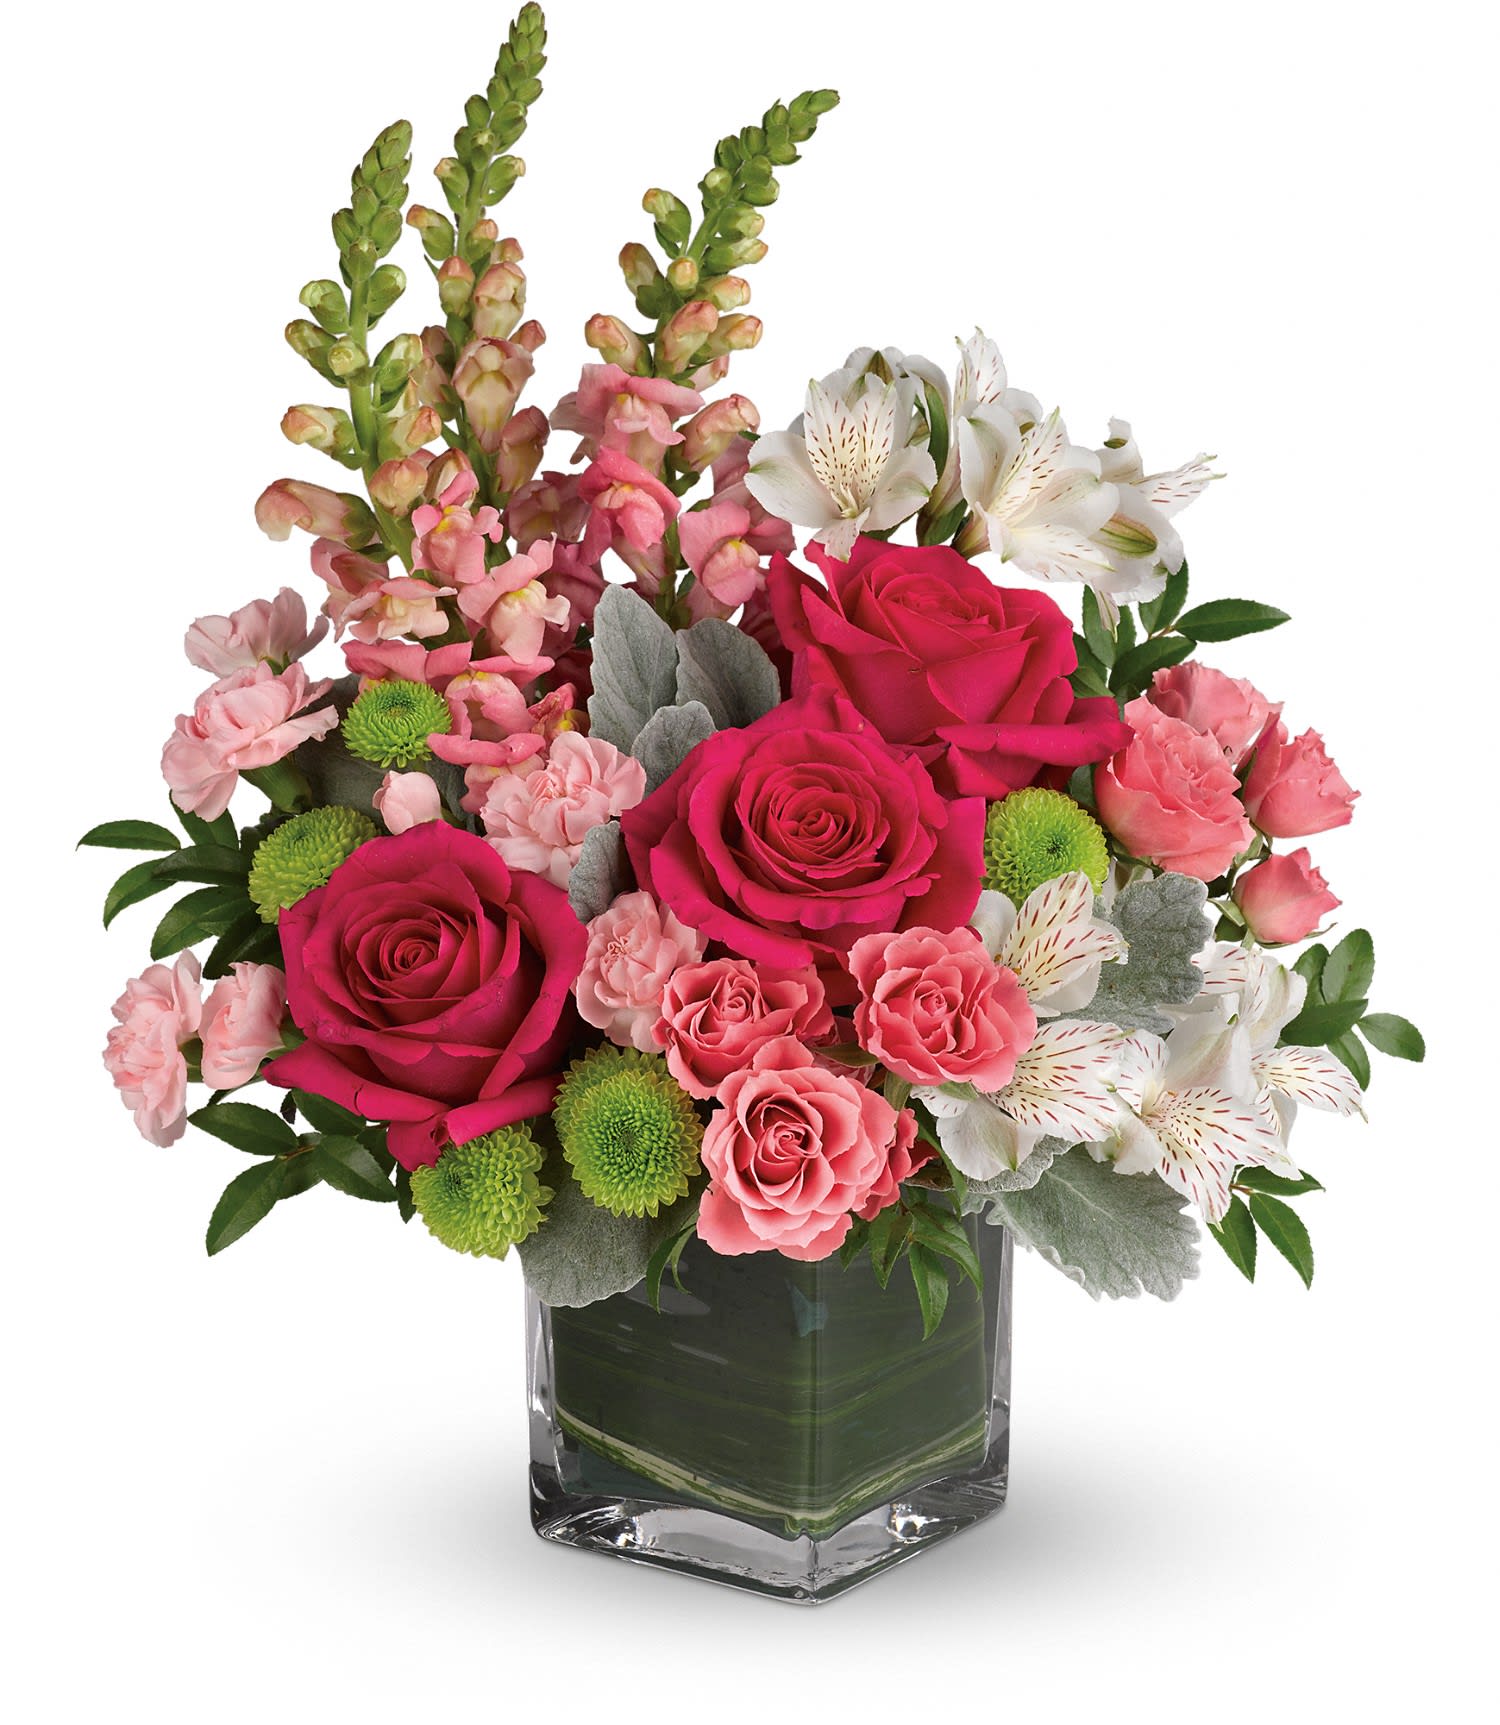 Garden Bouquet - Fun and feminine, this hot pink bouquet is reminiscent of a spring garden party with friends! Stunning roses, delicate alstroemeria and dramatic snapdragons are hand-delivered in a classic cube vase lined with a green leaf - a surprise gift that'll touch her heart, no matter the occasion. DG600-5A